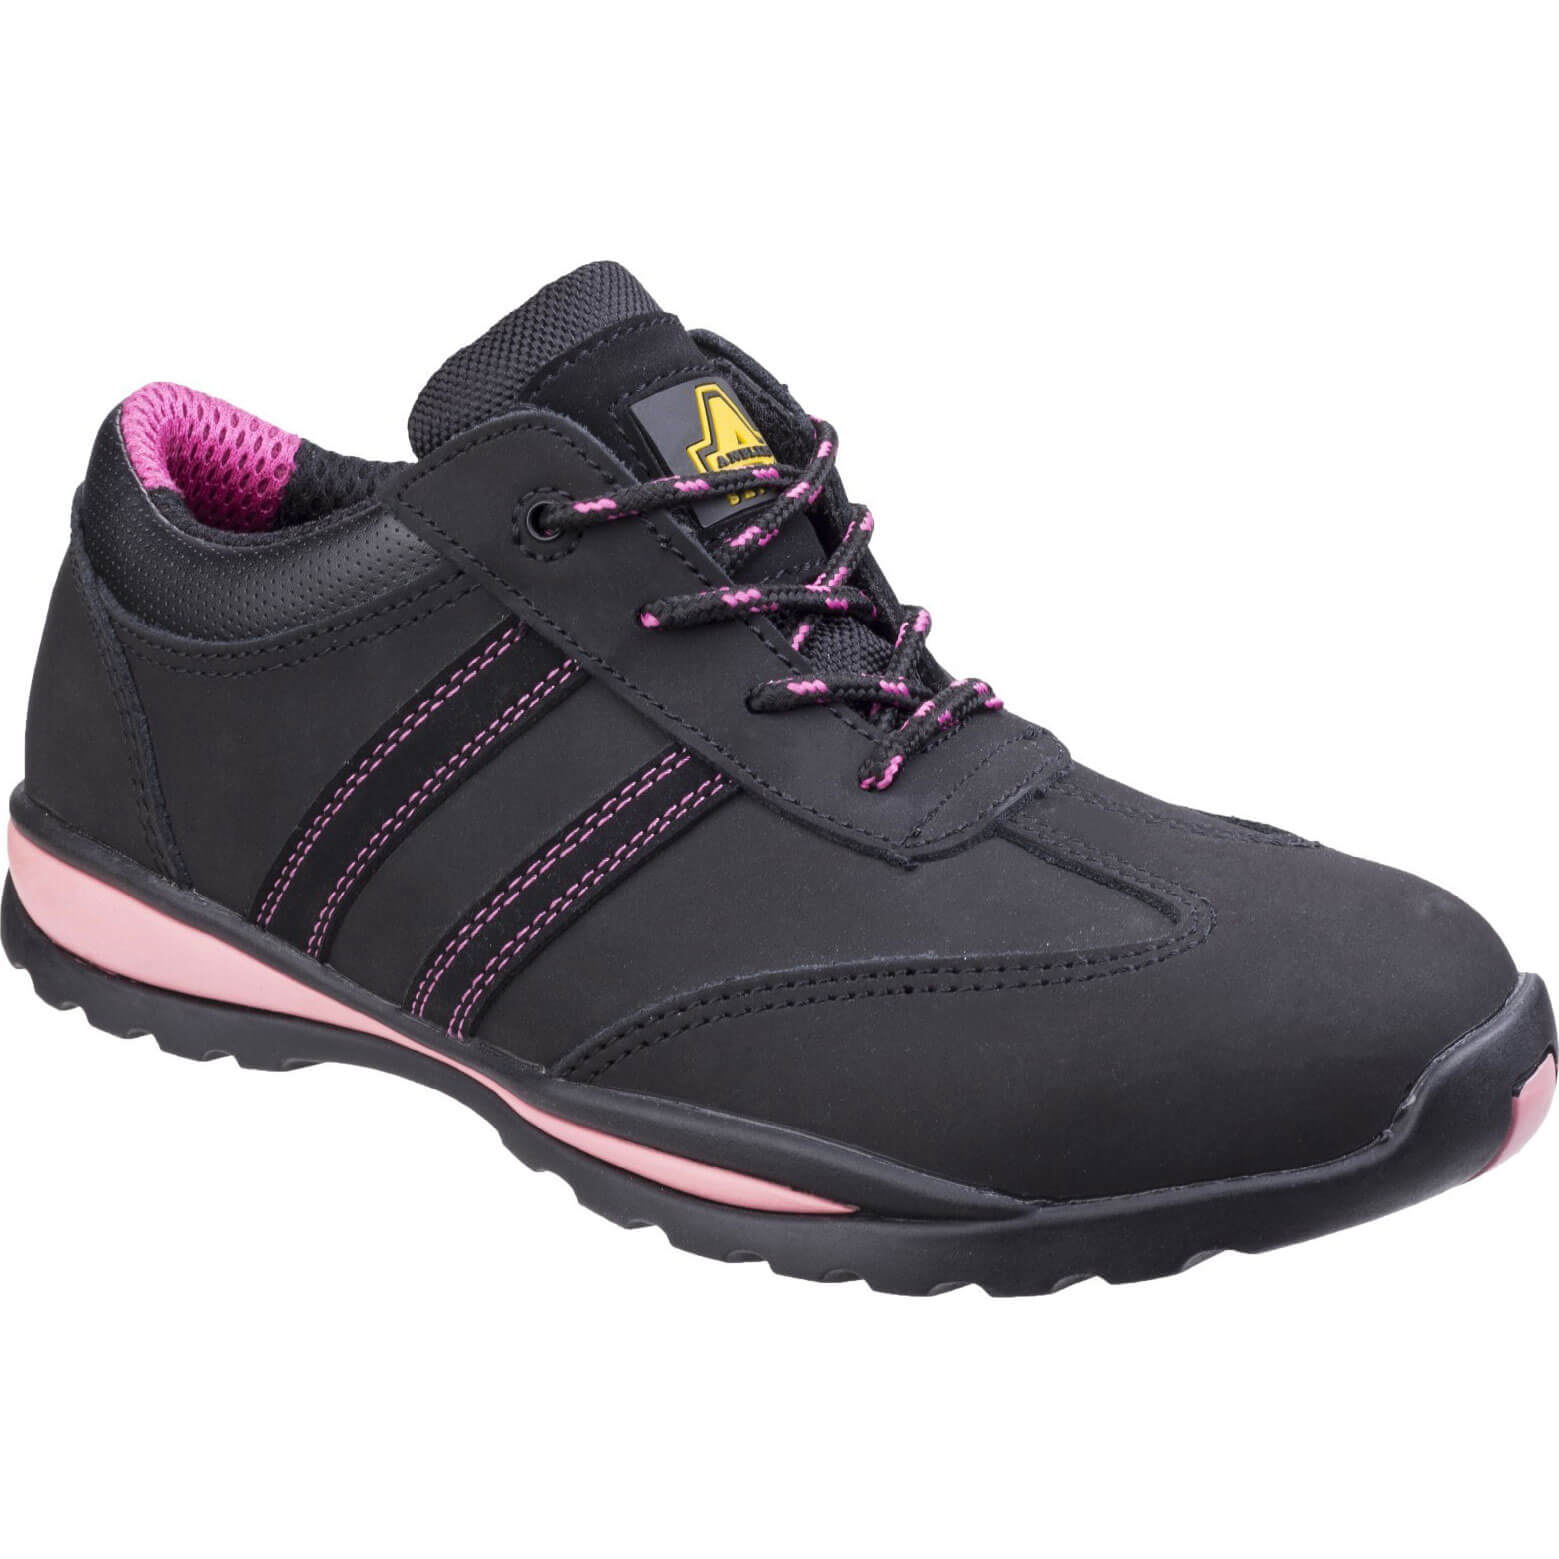 Image of Amblers Safety FS47 Heat Resistant Lace Up Safety Trainer Black / Pink Size 6